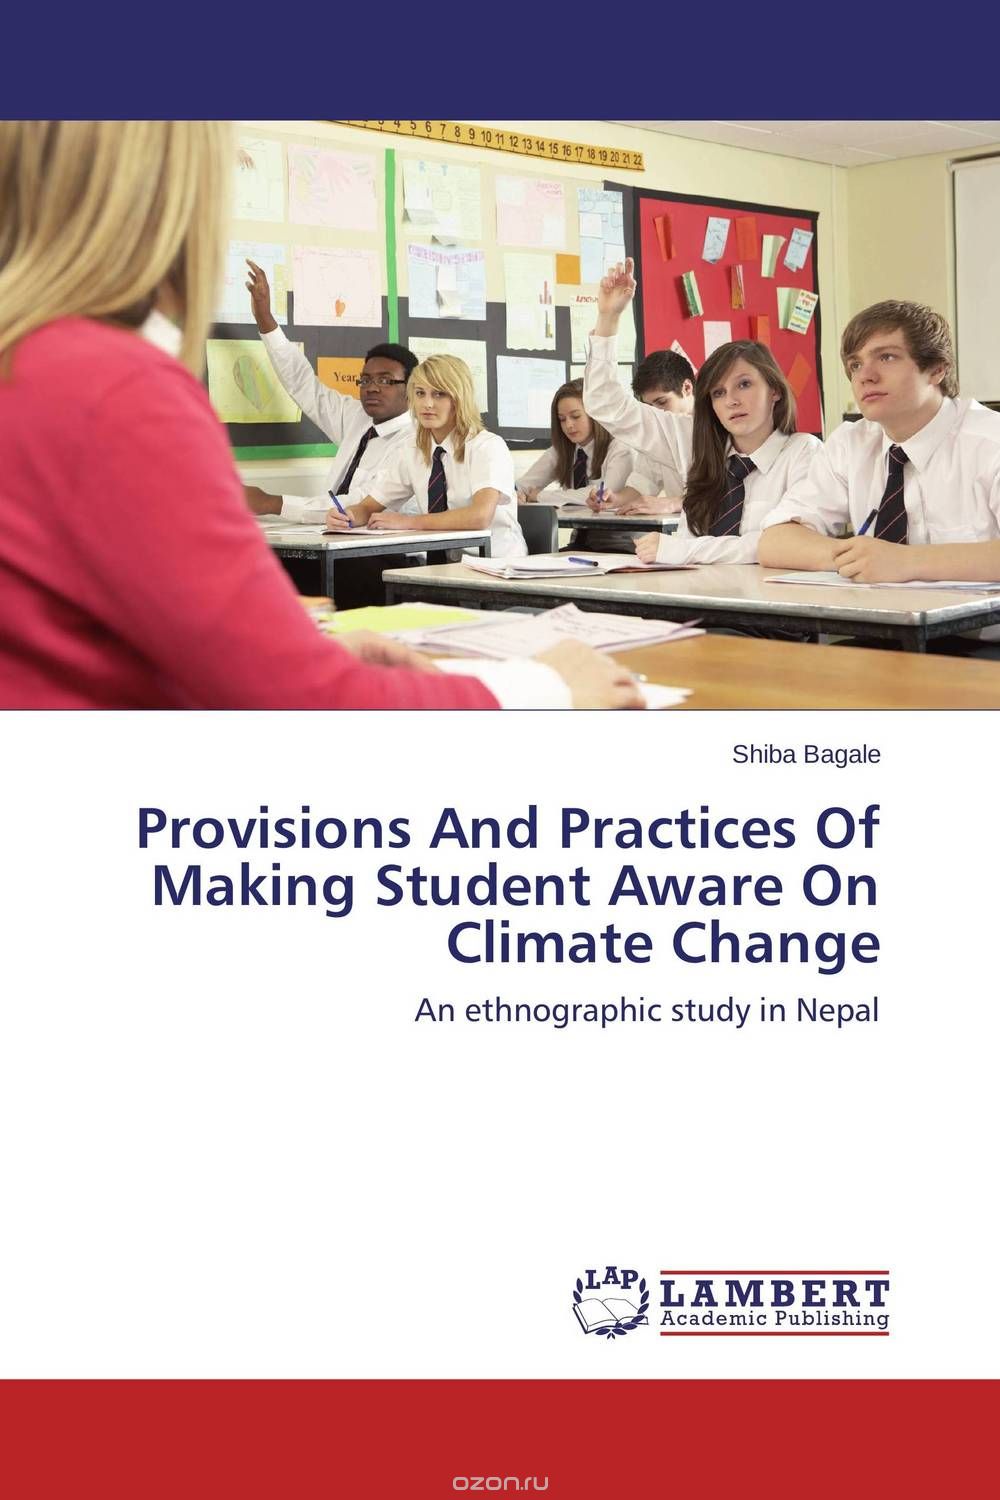 Скачать книгу "Provisions And Practices Of Making Student Aware On Climate Change"